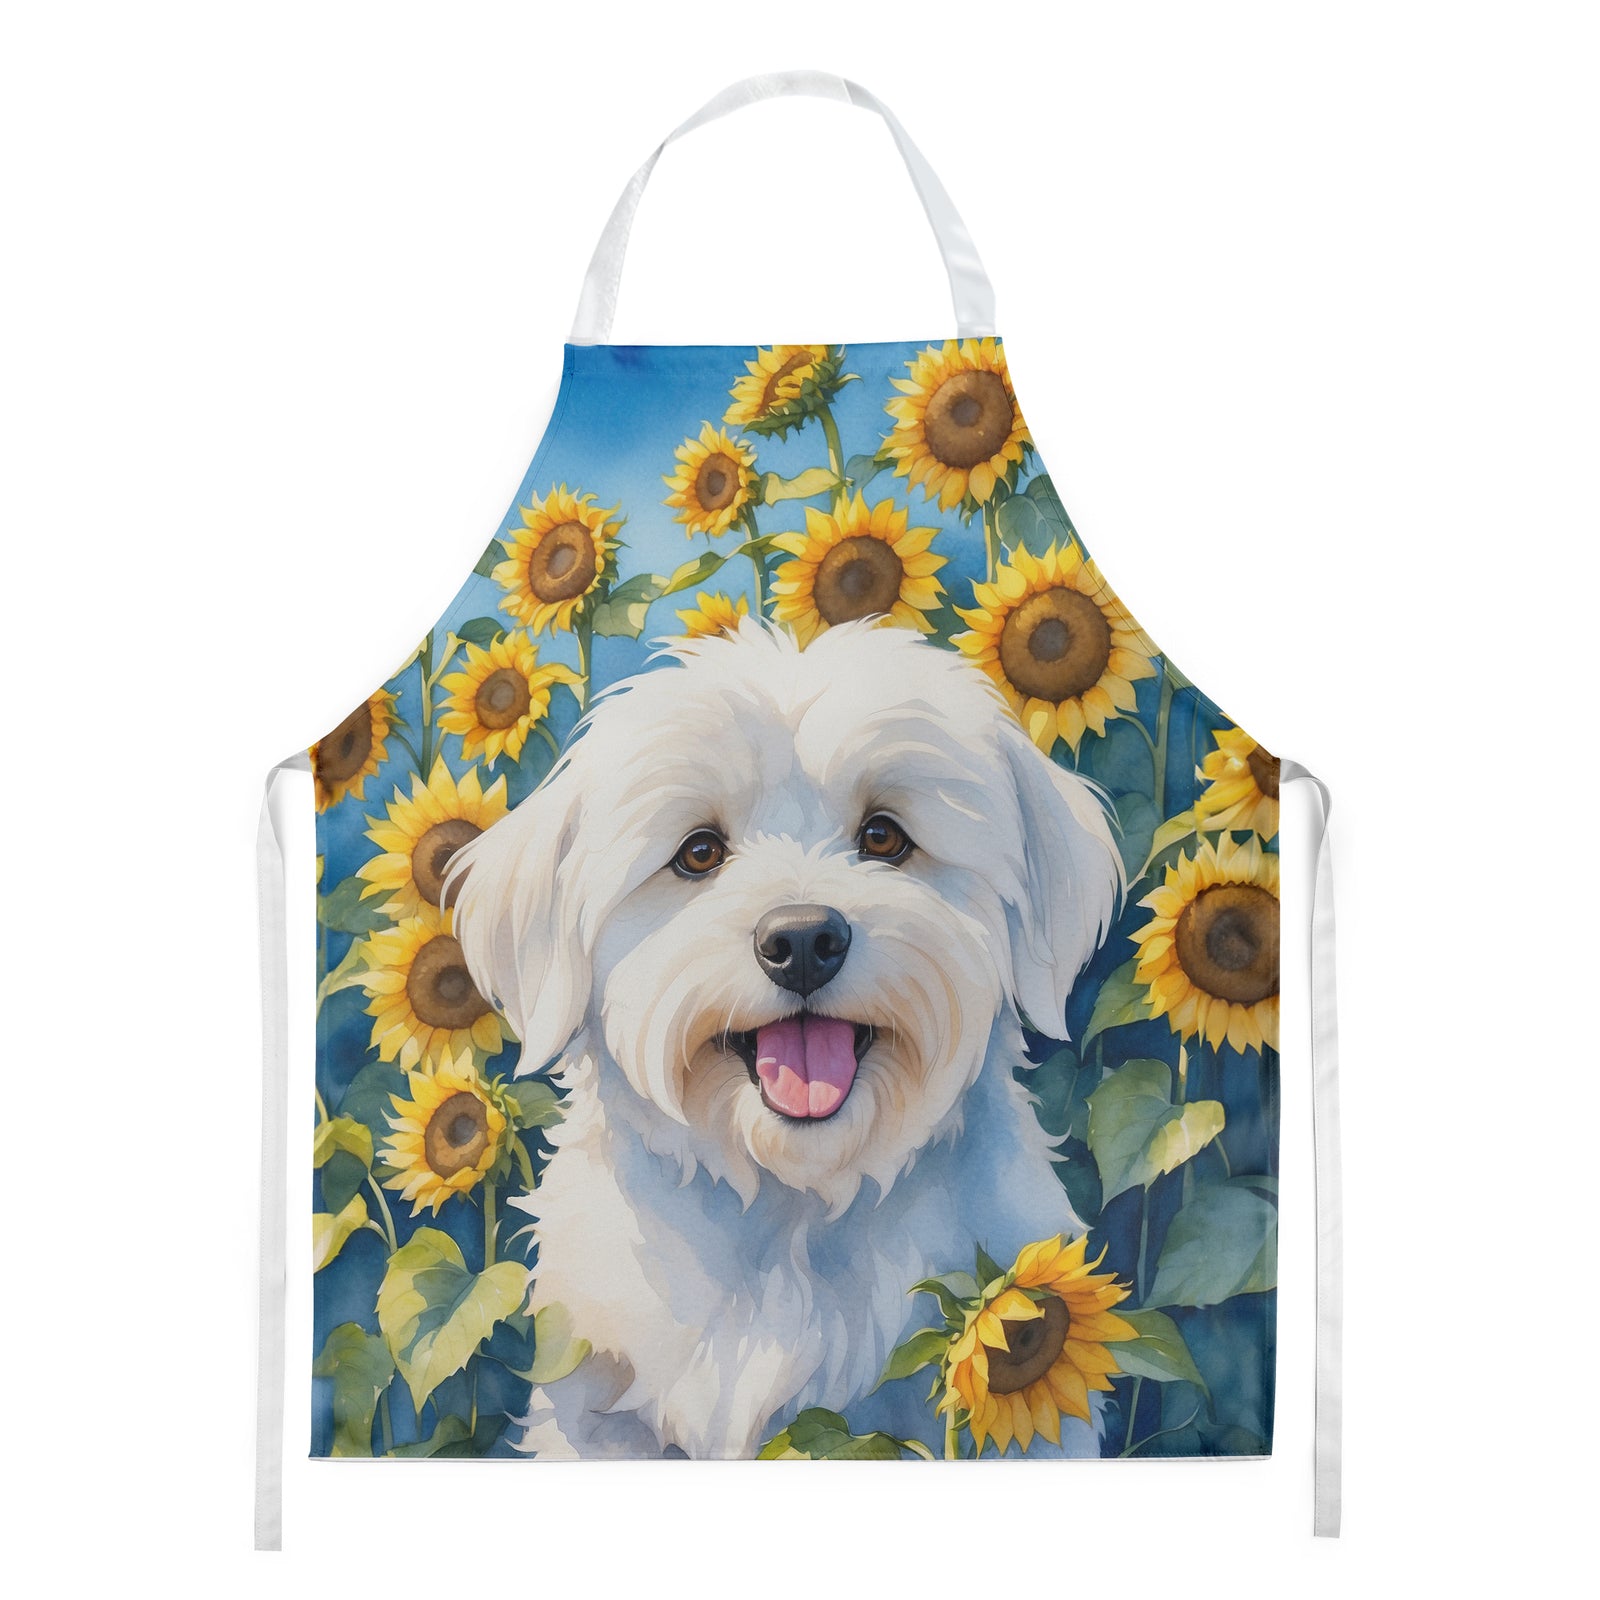 Buy this Coton de Tulear in Sunflowers Apron